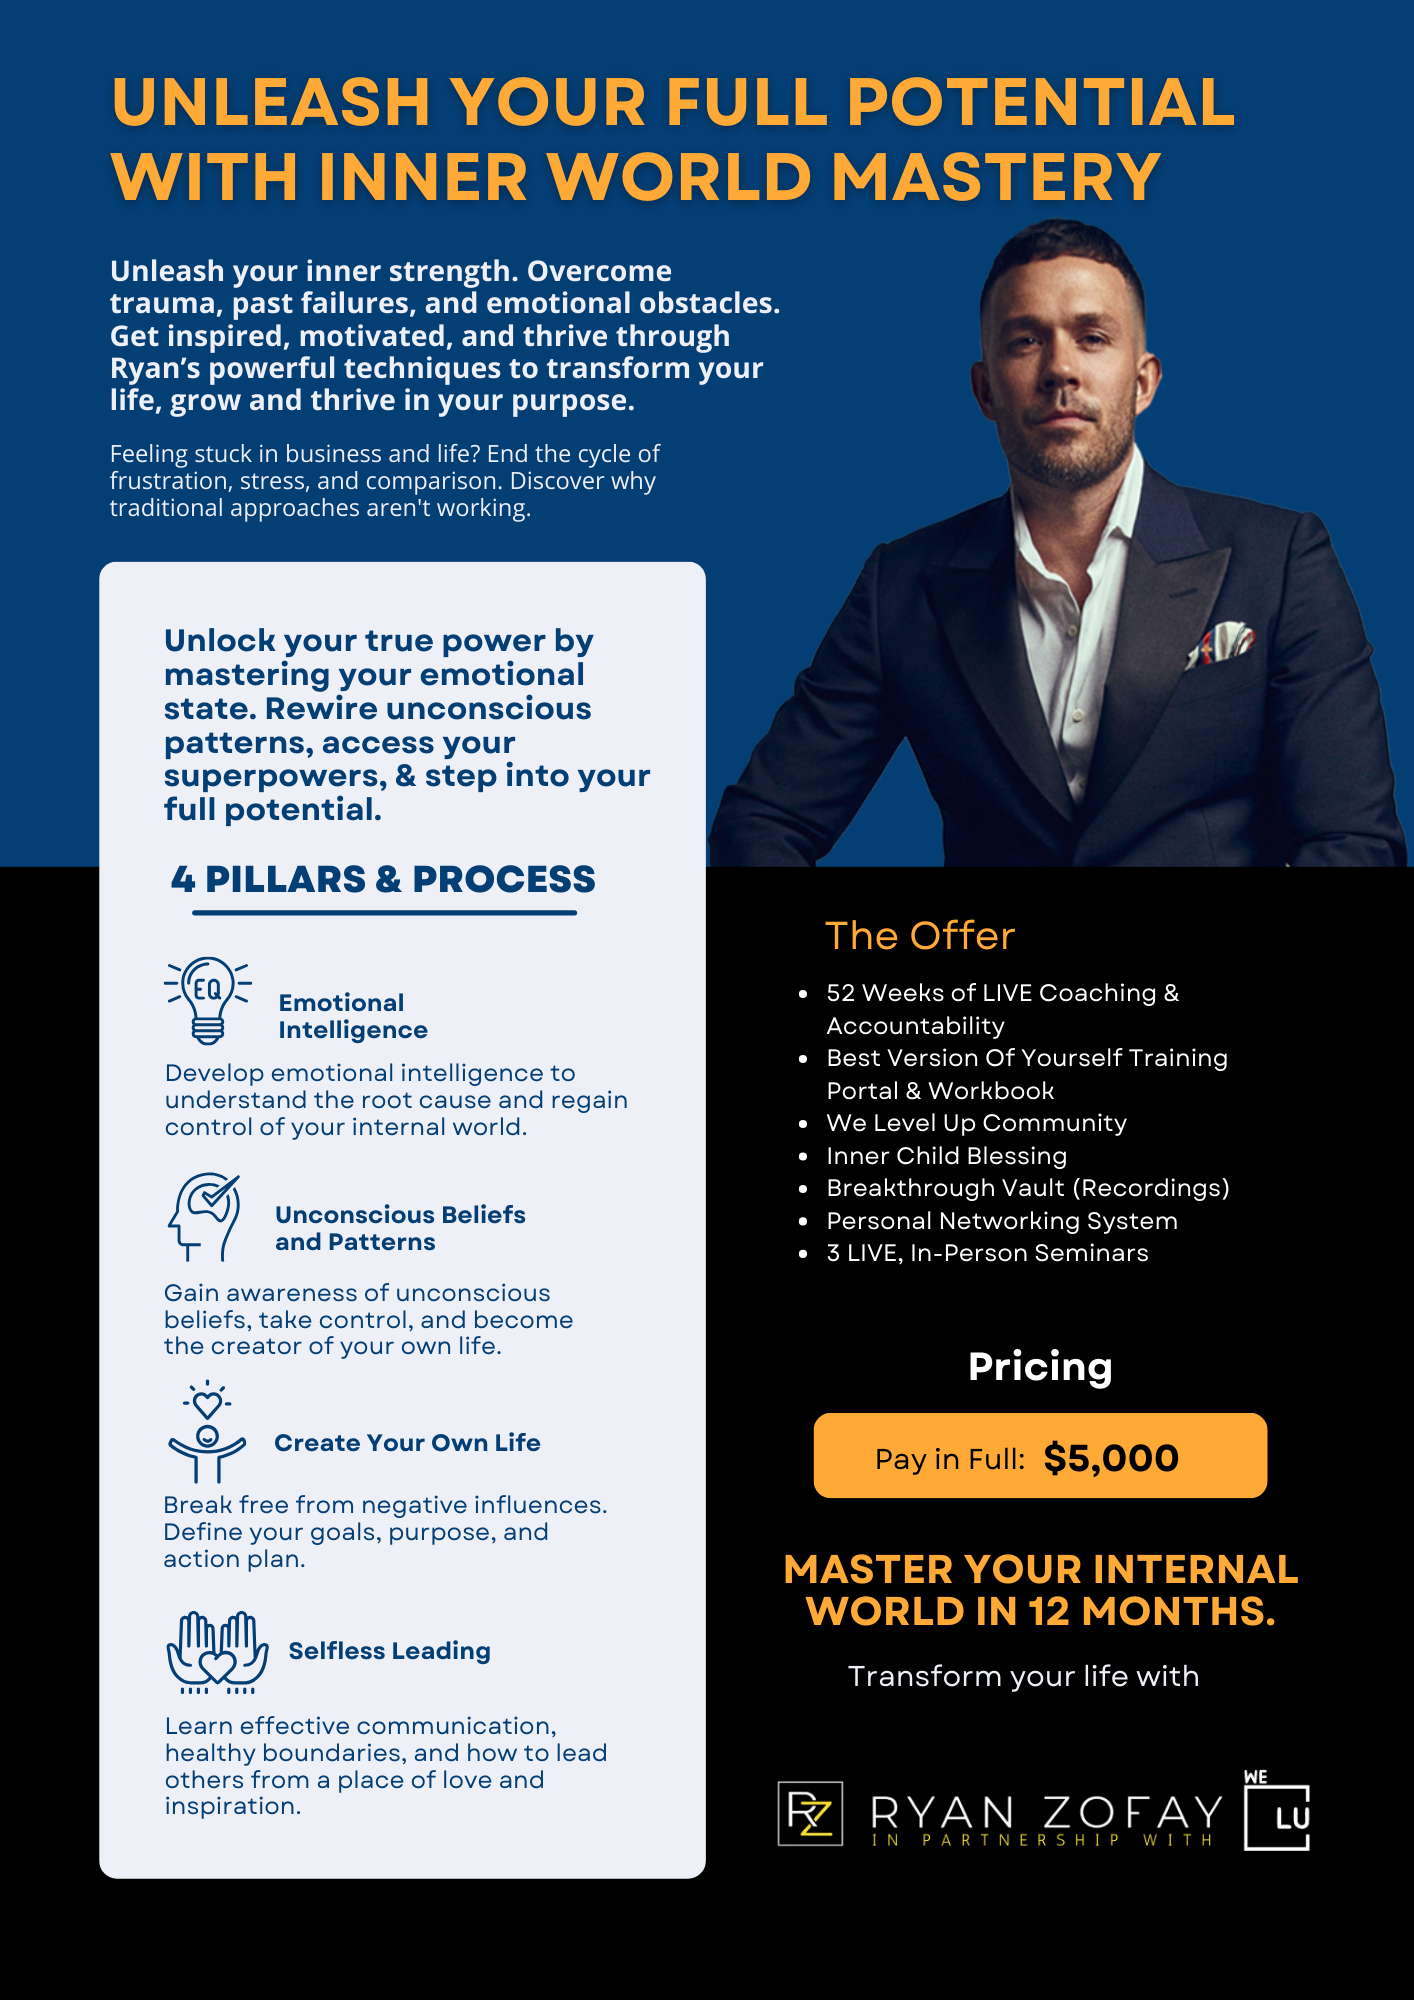 The ultimate life and business coaching offer: Ryan Zofay's master minds course offers both lessons, community, and strategies. Learn how to master your emotions to unleash your true potential.